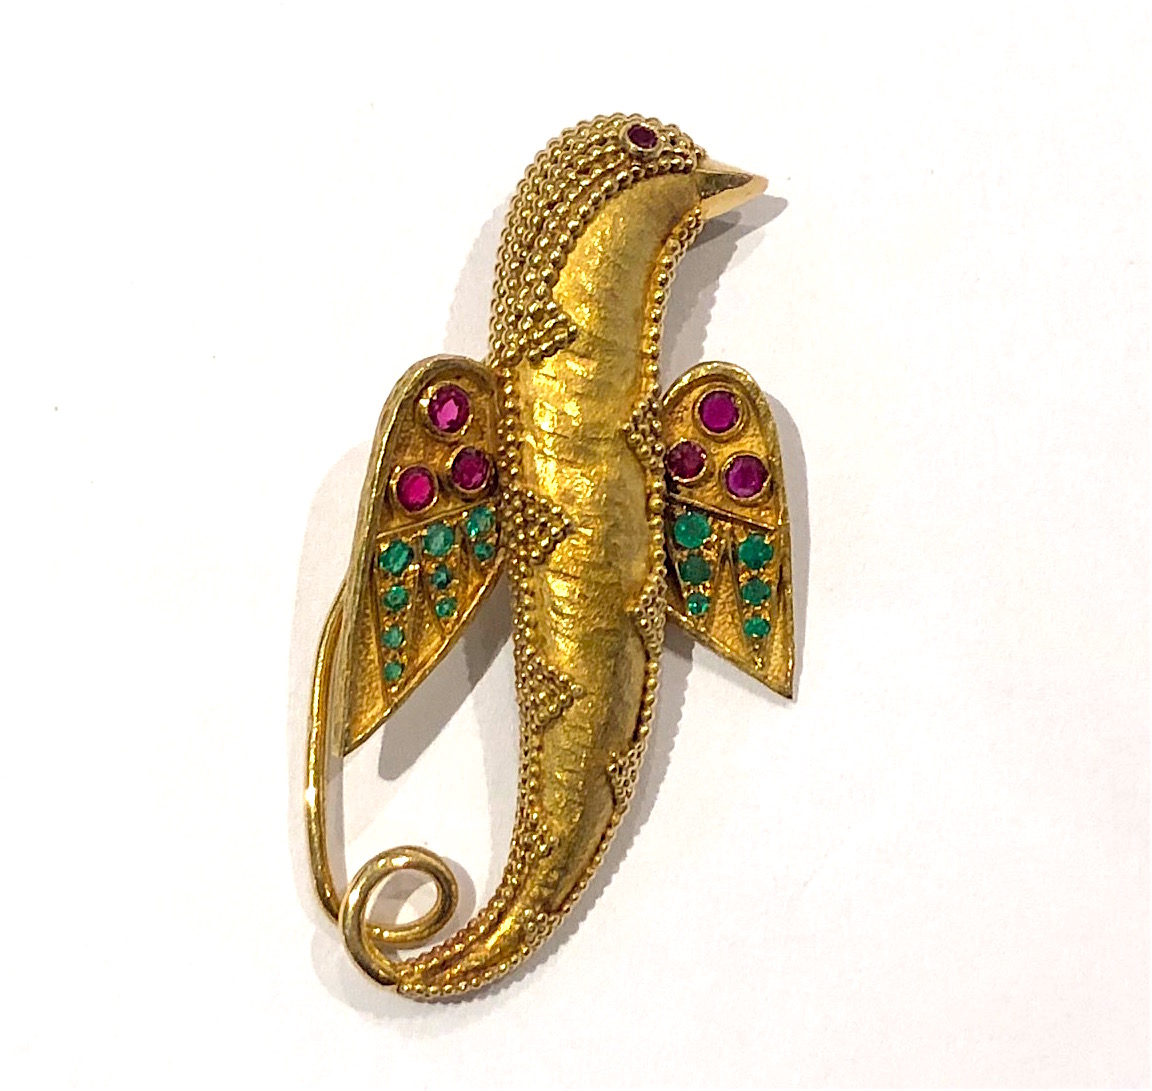 Van Cleef & Arpels, Paris, “Etruscan Revival” theme bird brooch in 18k gold set with 7 rubies (approx. 0.80 carats TW) and 15 emeralds (approx. 0.40 carats TW), signed: VCA, France, C in a circle (copyright mark), no.  1K84.1, French Eagle’s head mark for 18k gold, c. 1940’s